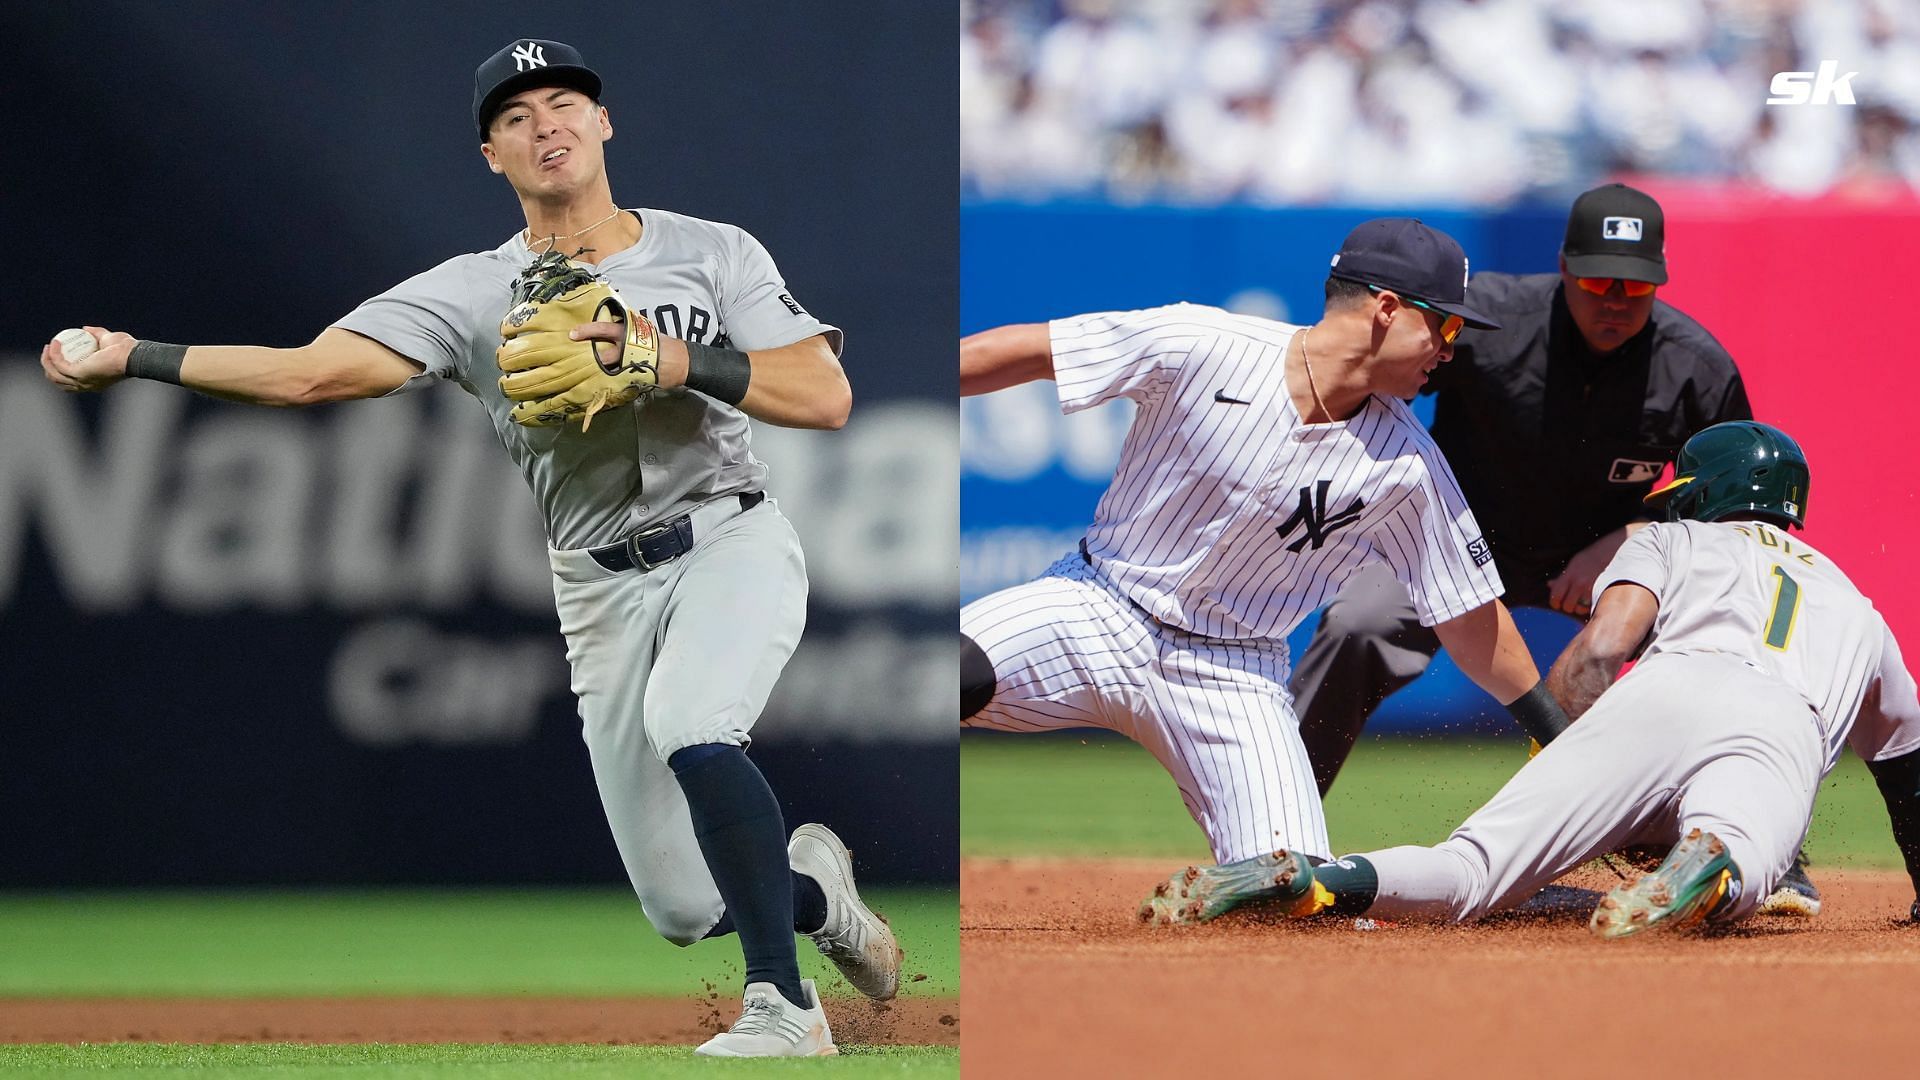 WATCH: New York Yankees shortstop Anthony Volpe receives Gold Gloved Award ahead of Oakland A